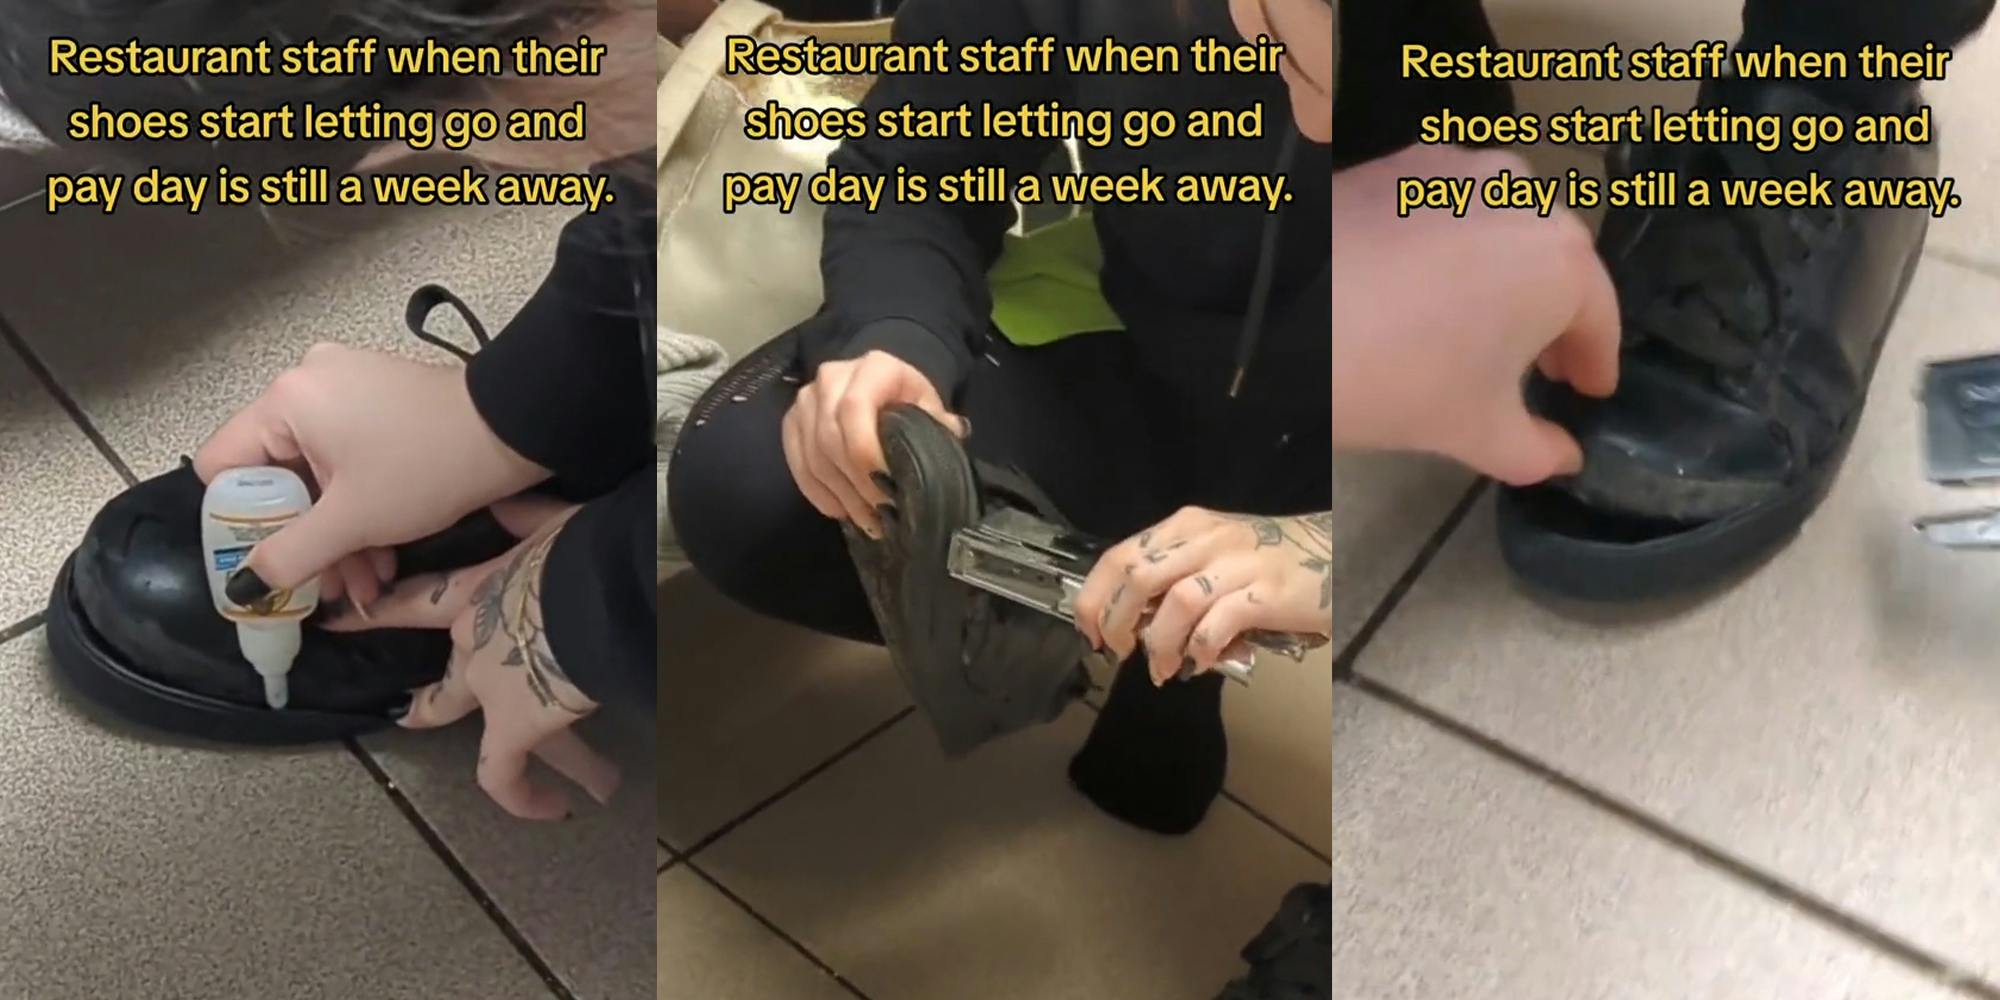 Servers have to staple torn shoes back together since payday is 'still a week away